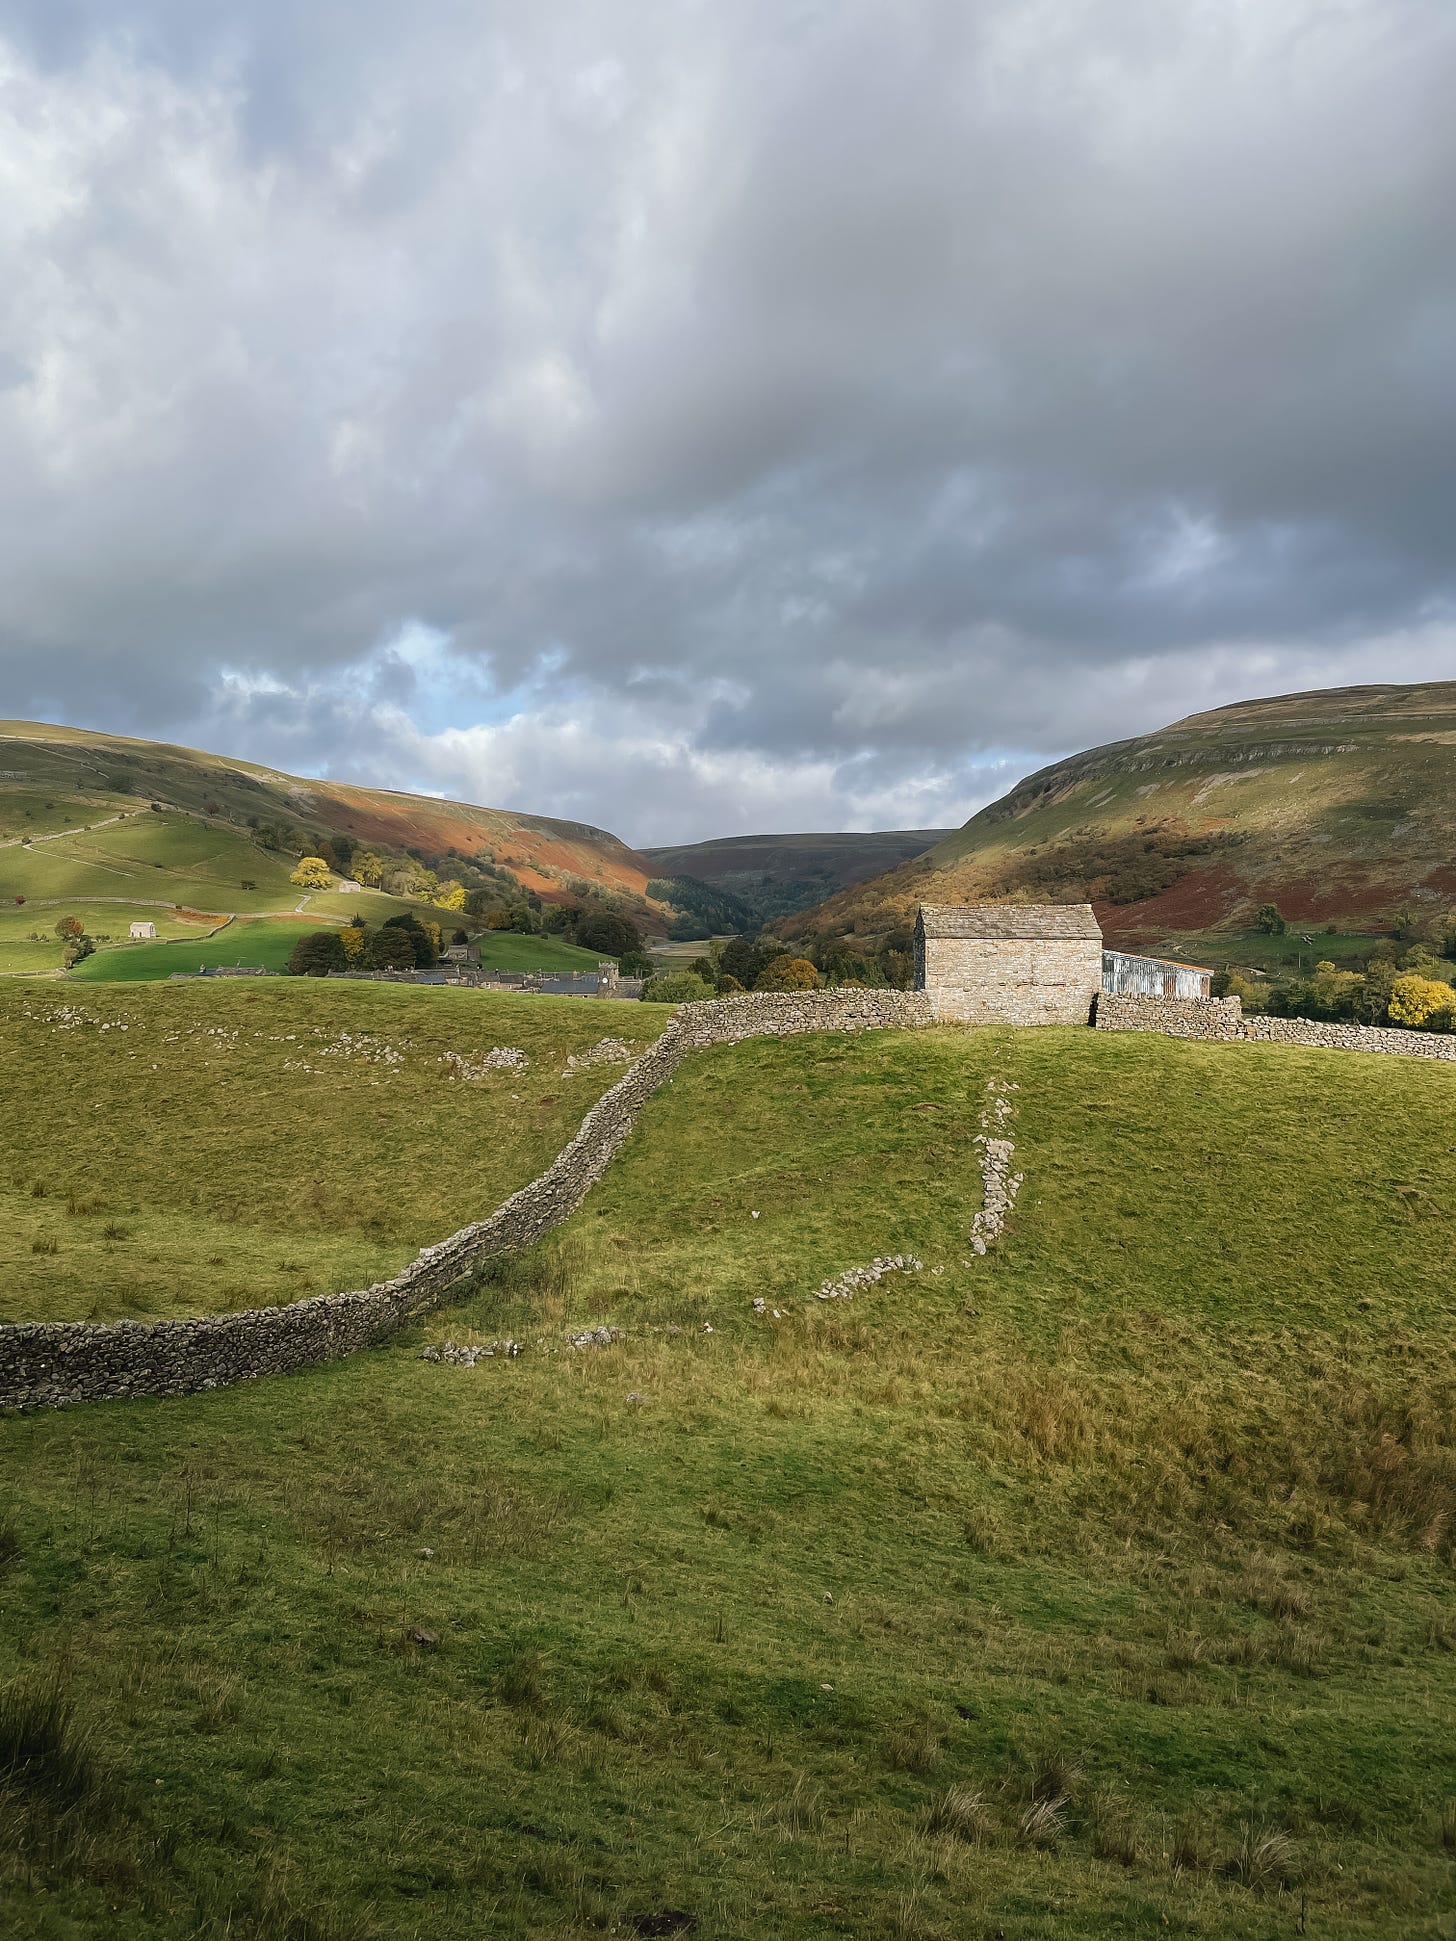 A landscape of hills and stone walls. A stone barn to the left of centre. Cloudy day.